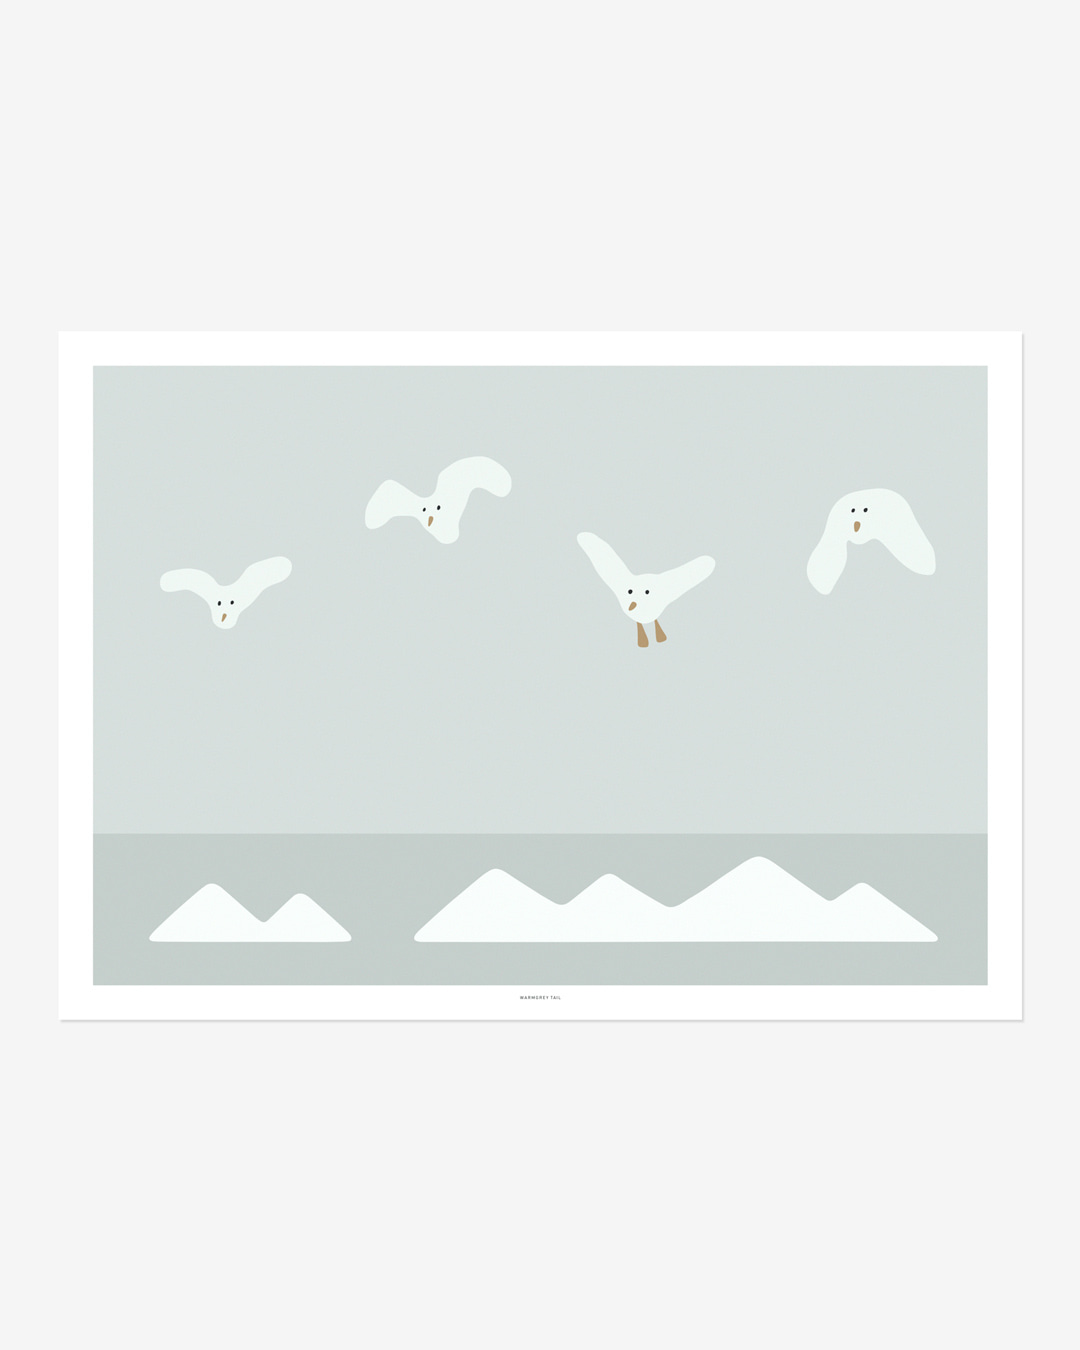 FLYING SEAGULLS POSTER